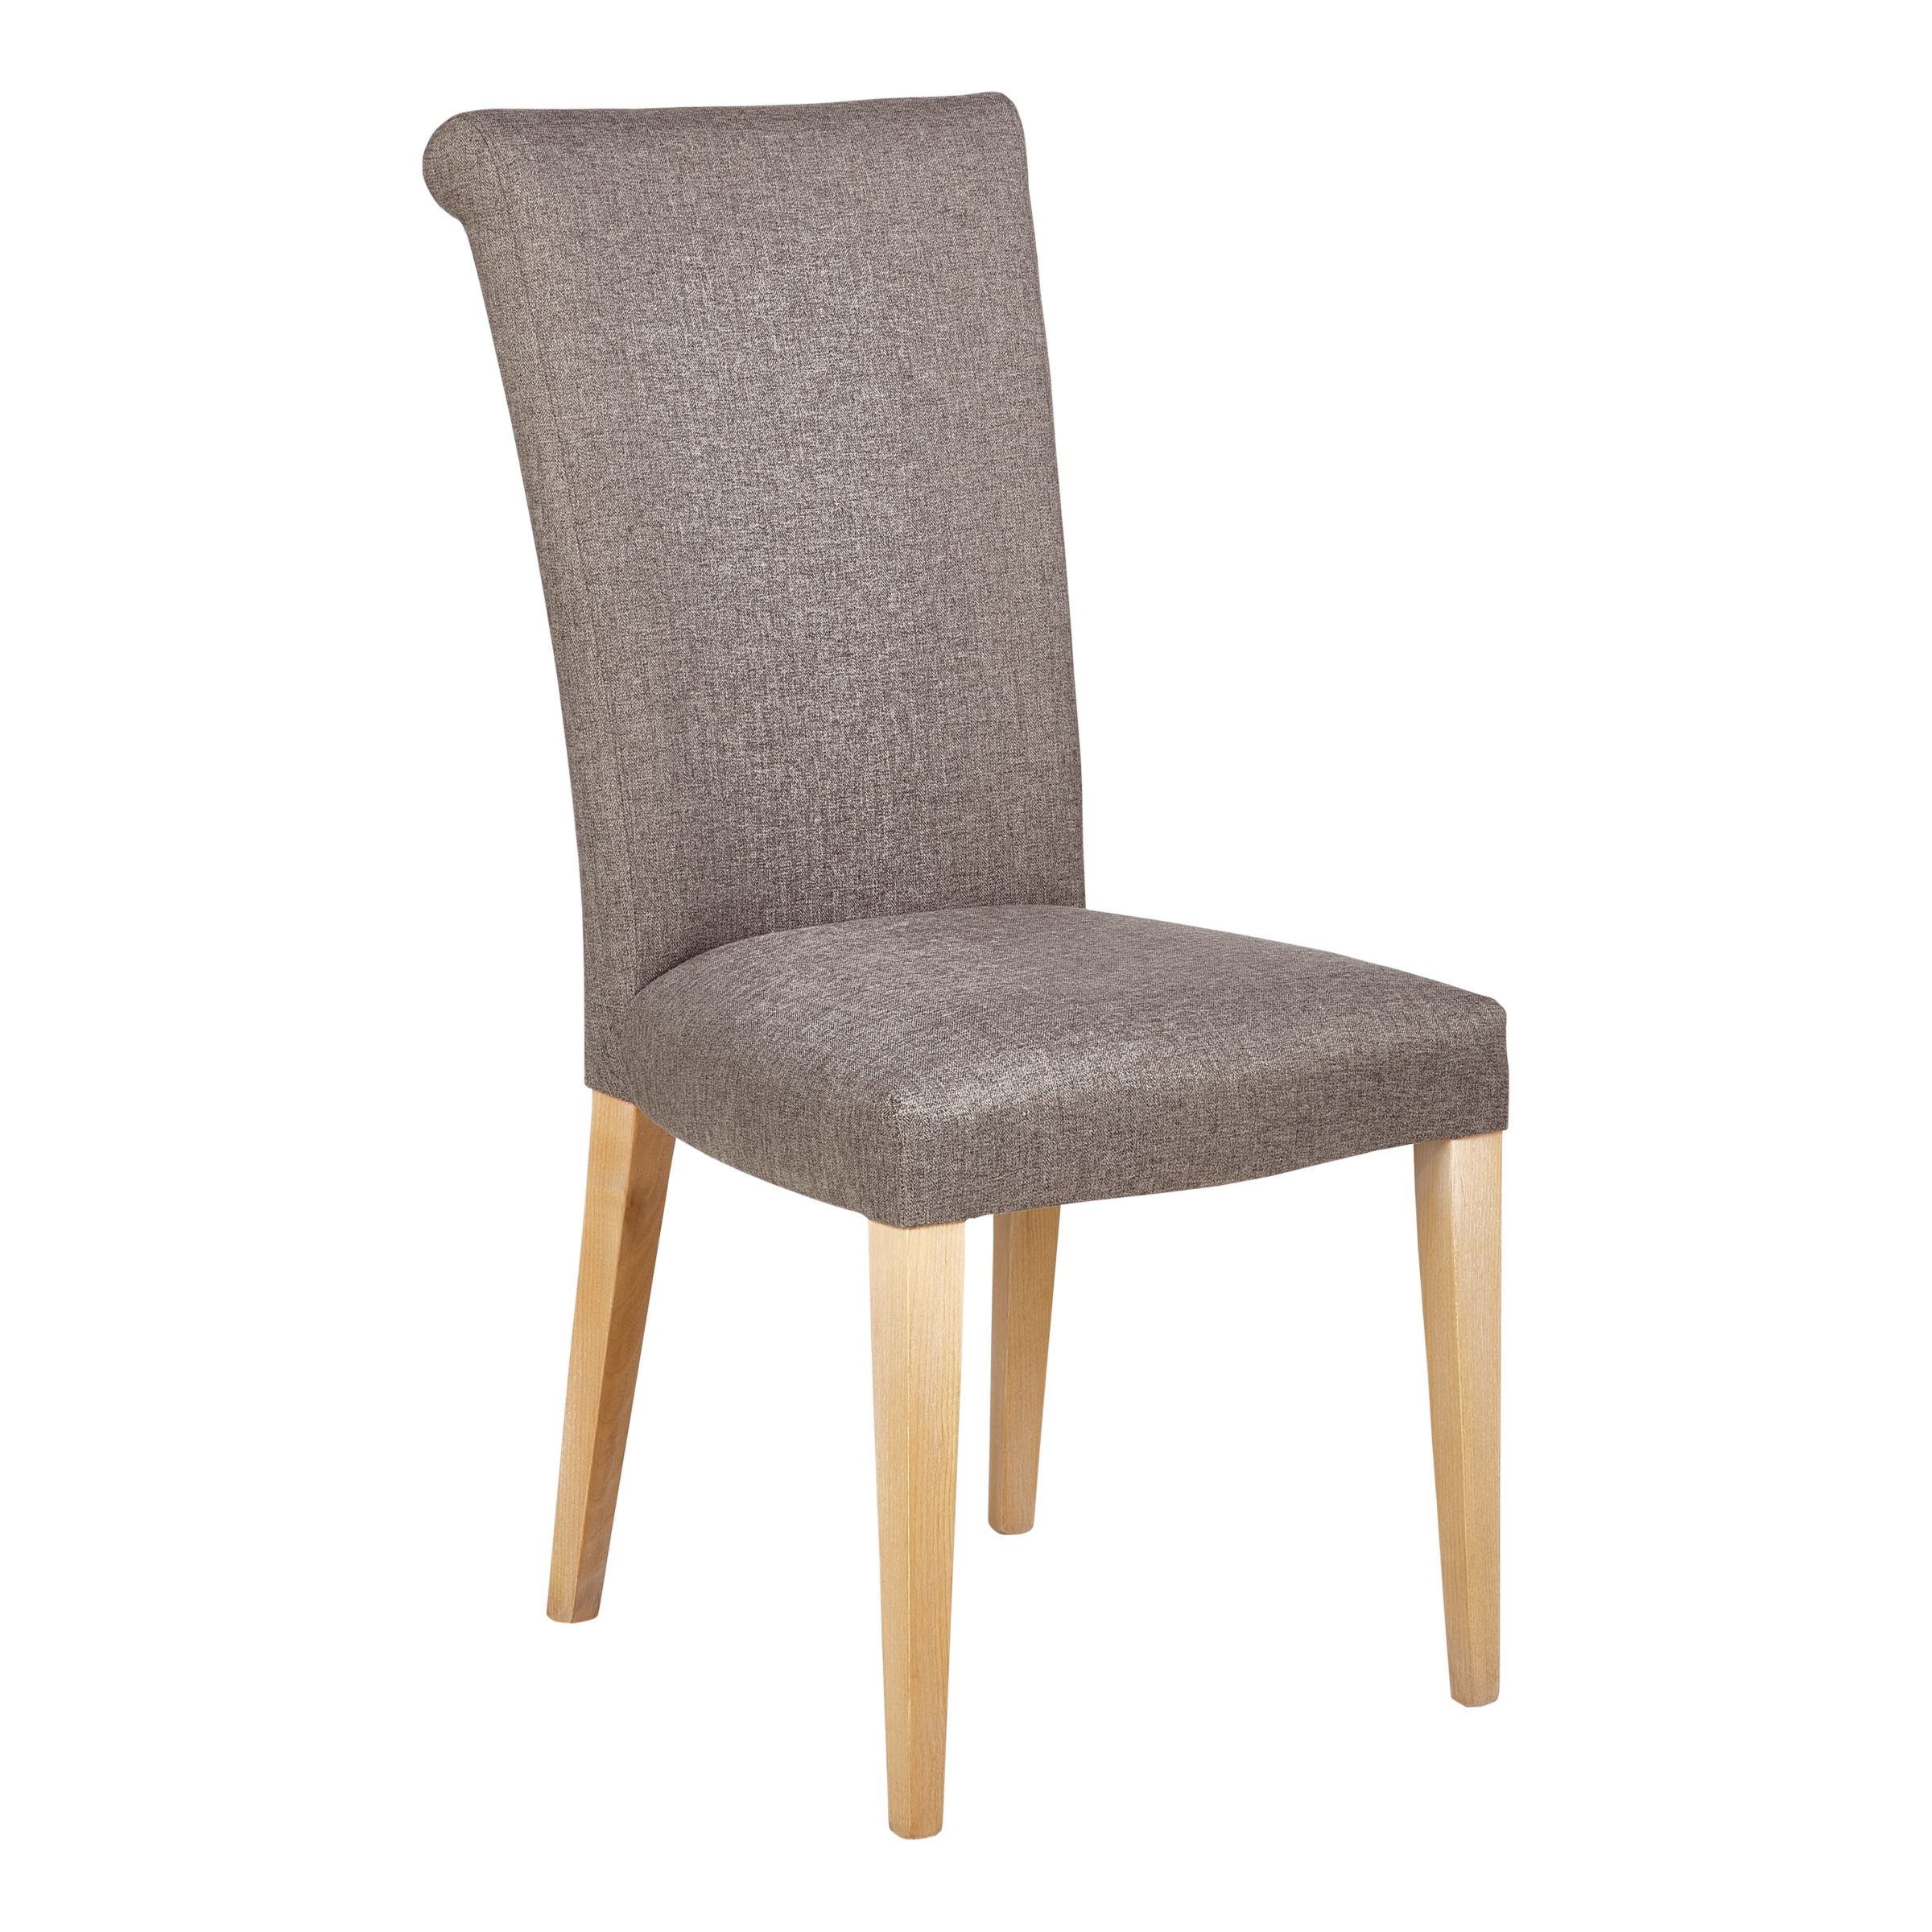 John Lewis & Partners Evelyn High Back Upholstered Dining Chair, Vietto Grey, FSC-Certified (Ash)